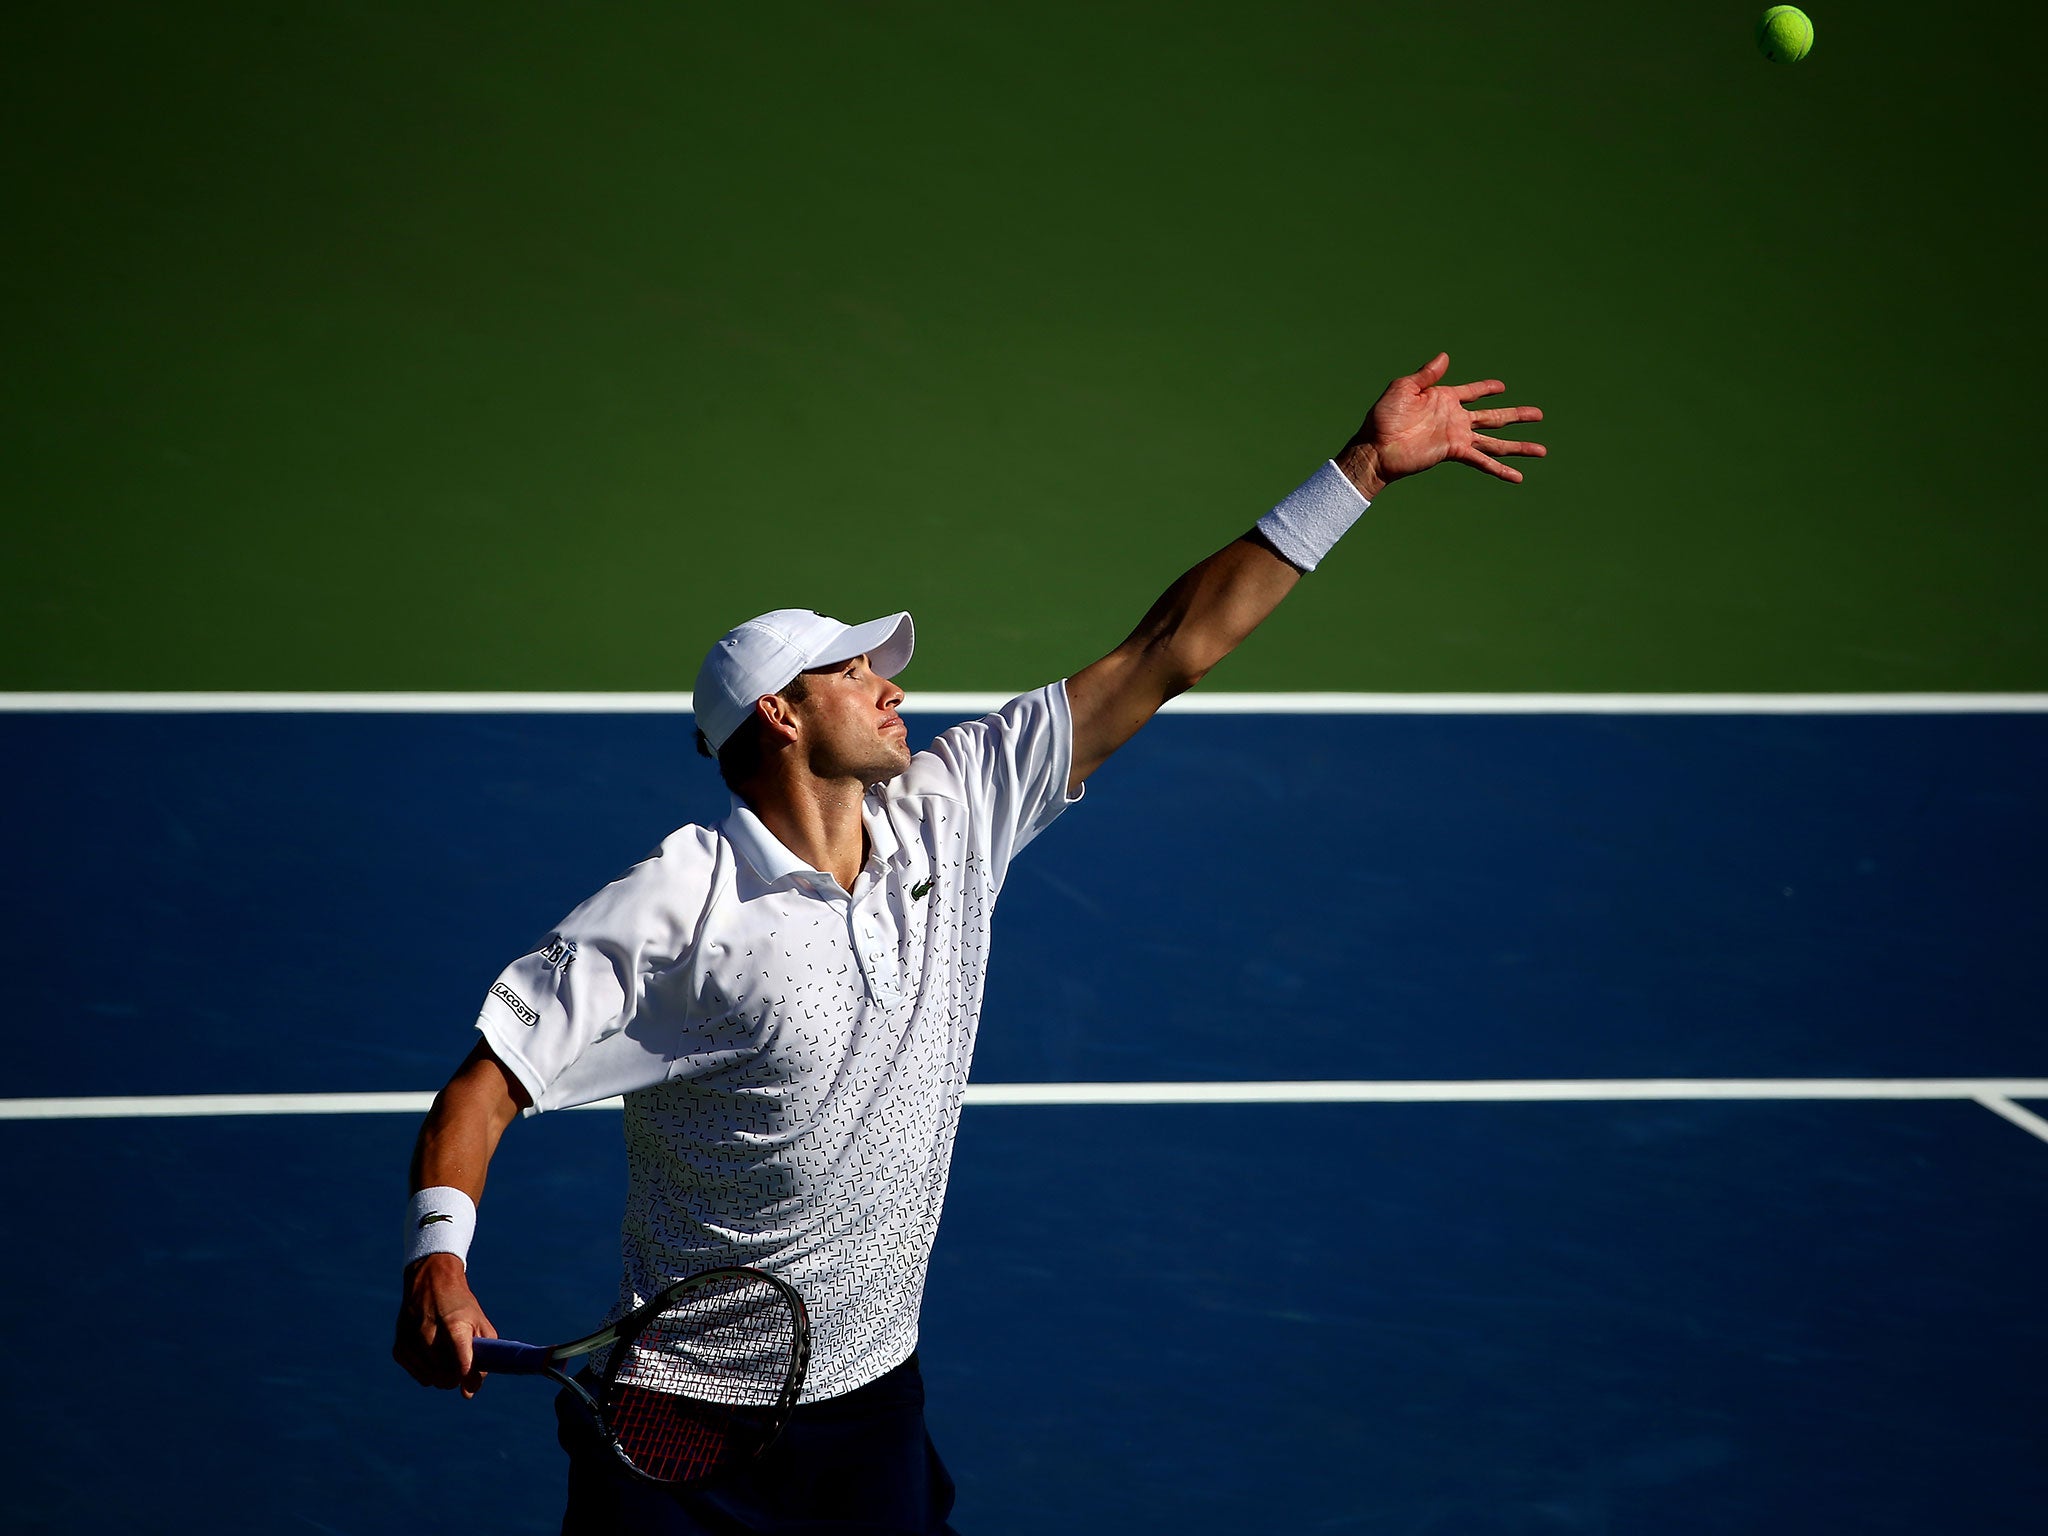 The world No 15 John Isner has a good strike rate with his second as well as first serves